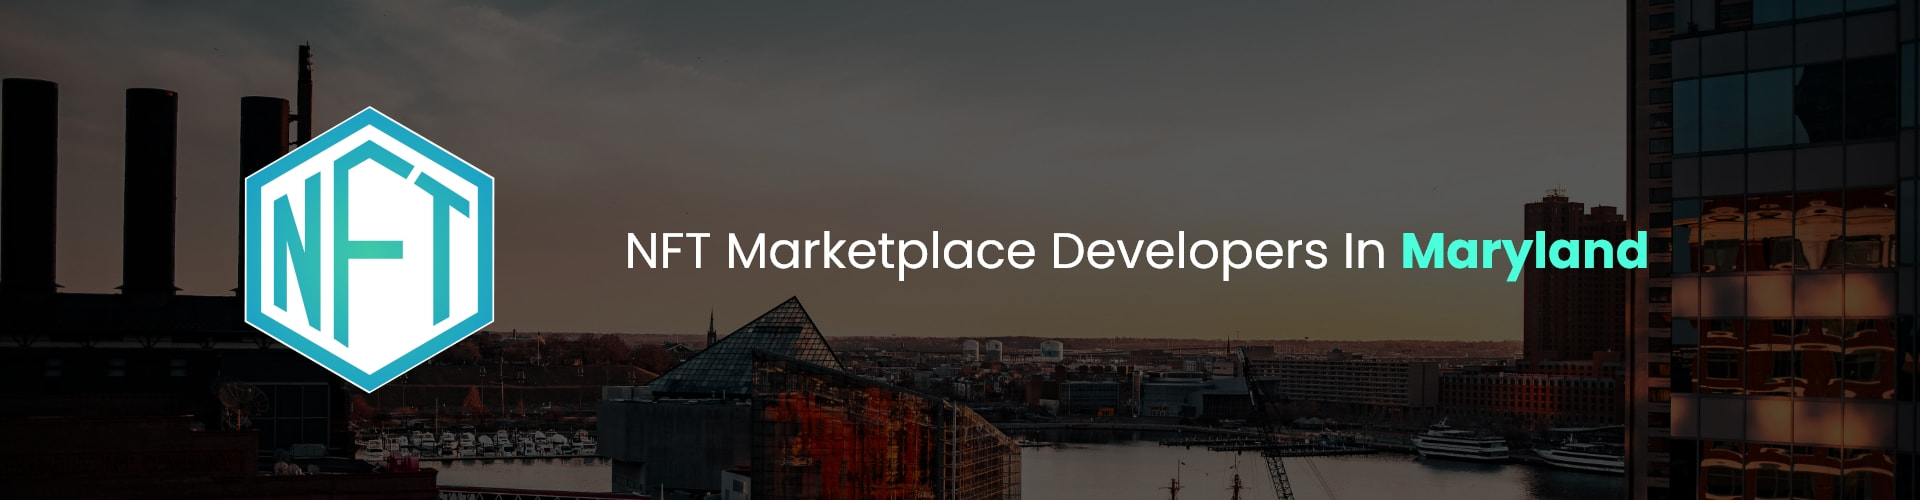 hire nft marketplace developers in maryland